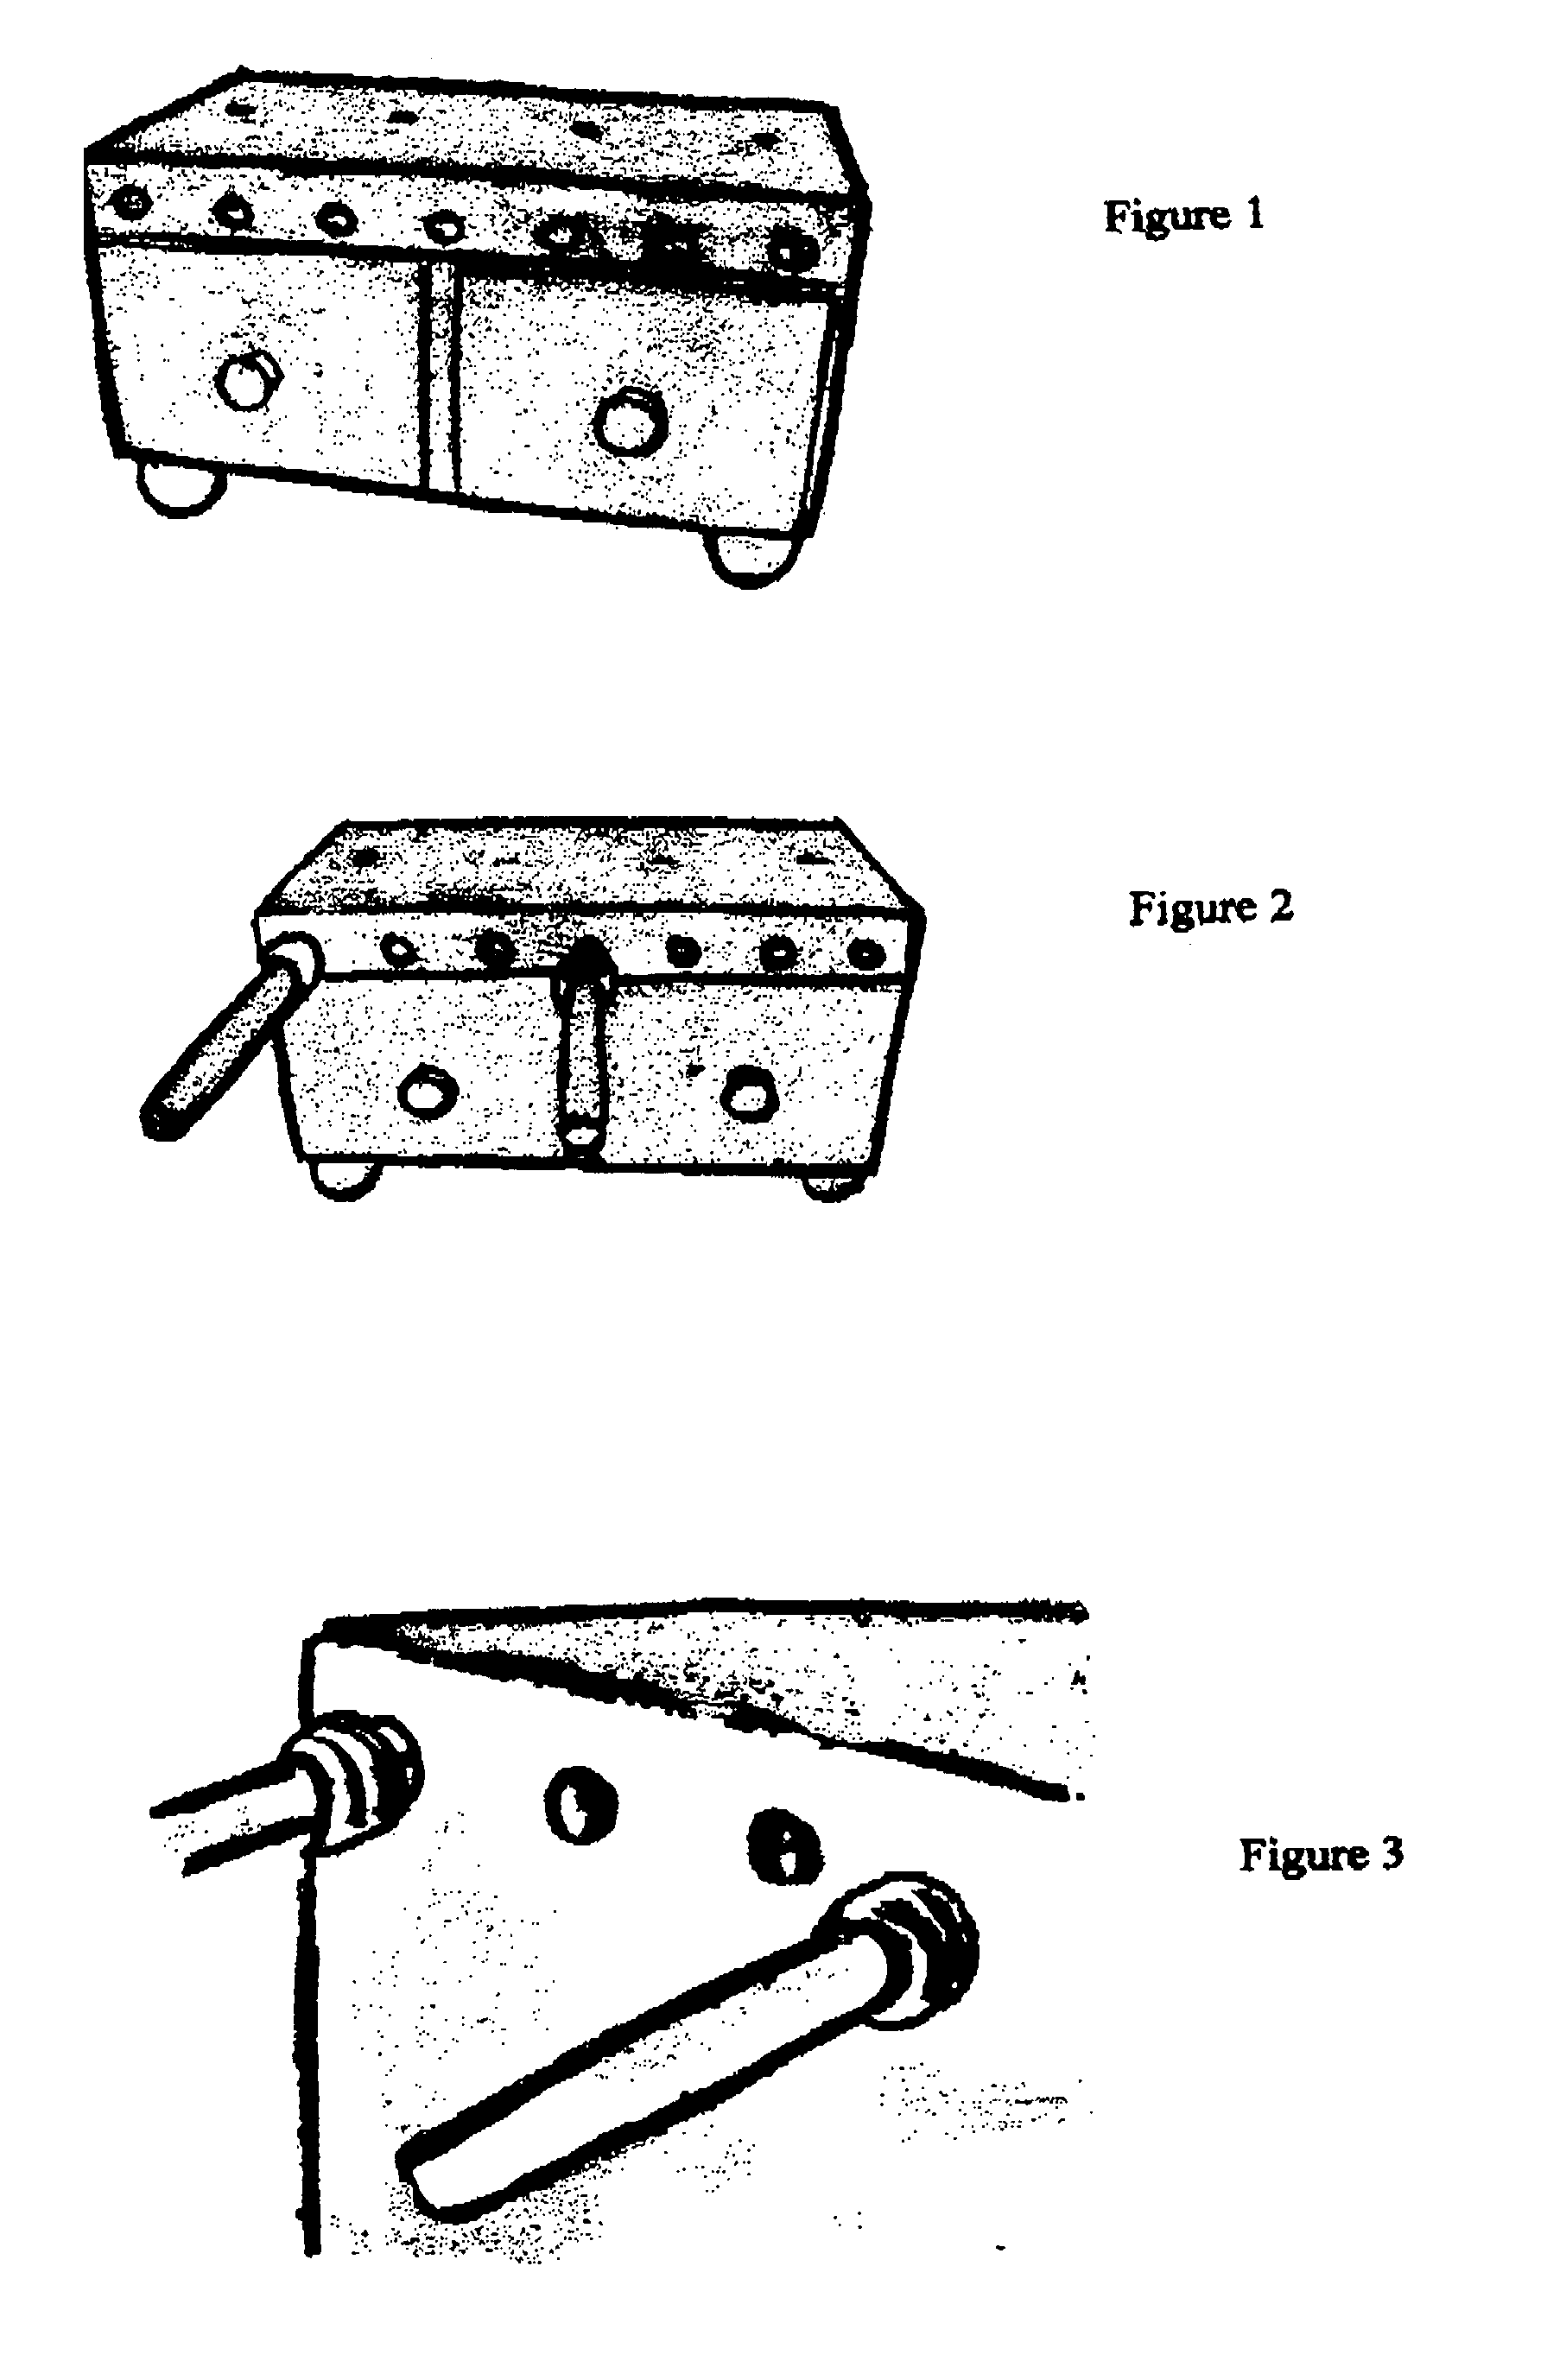 Bow-making assist device with storage